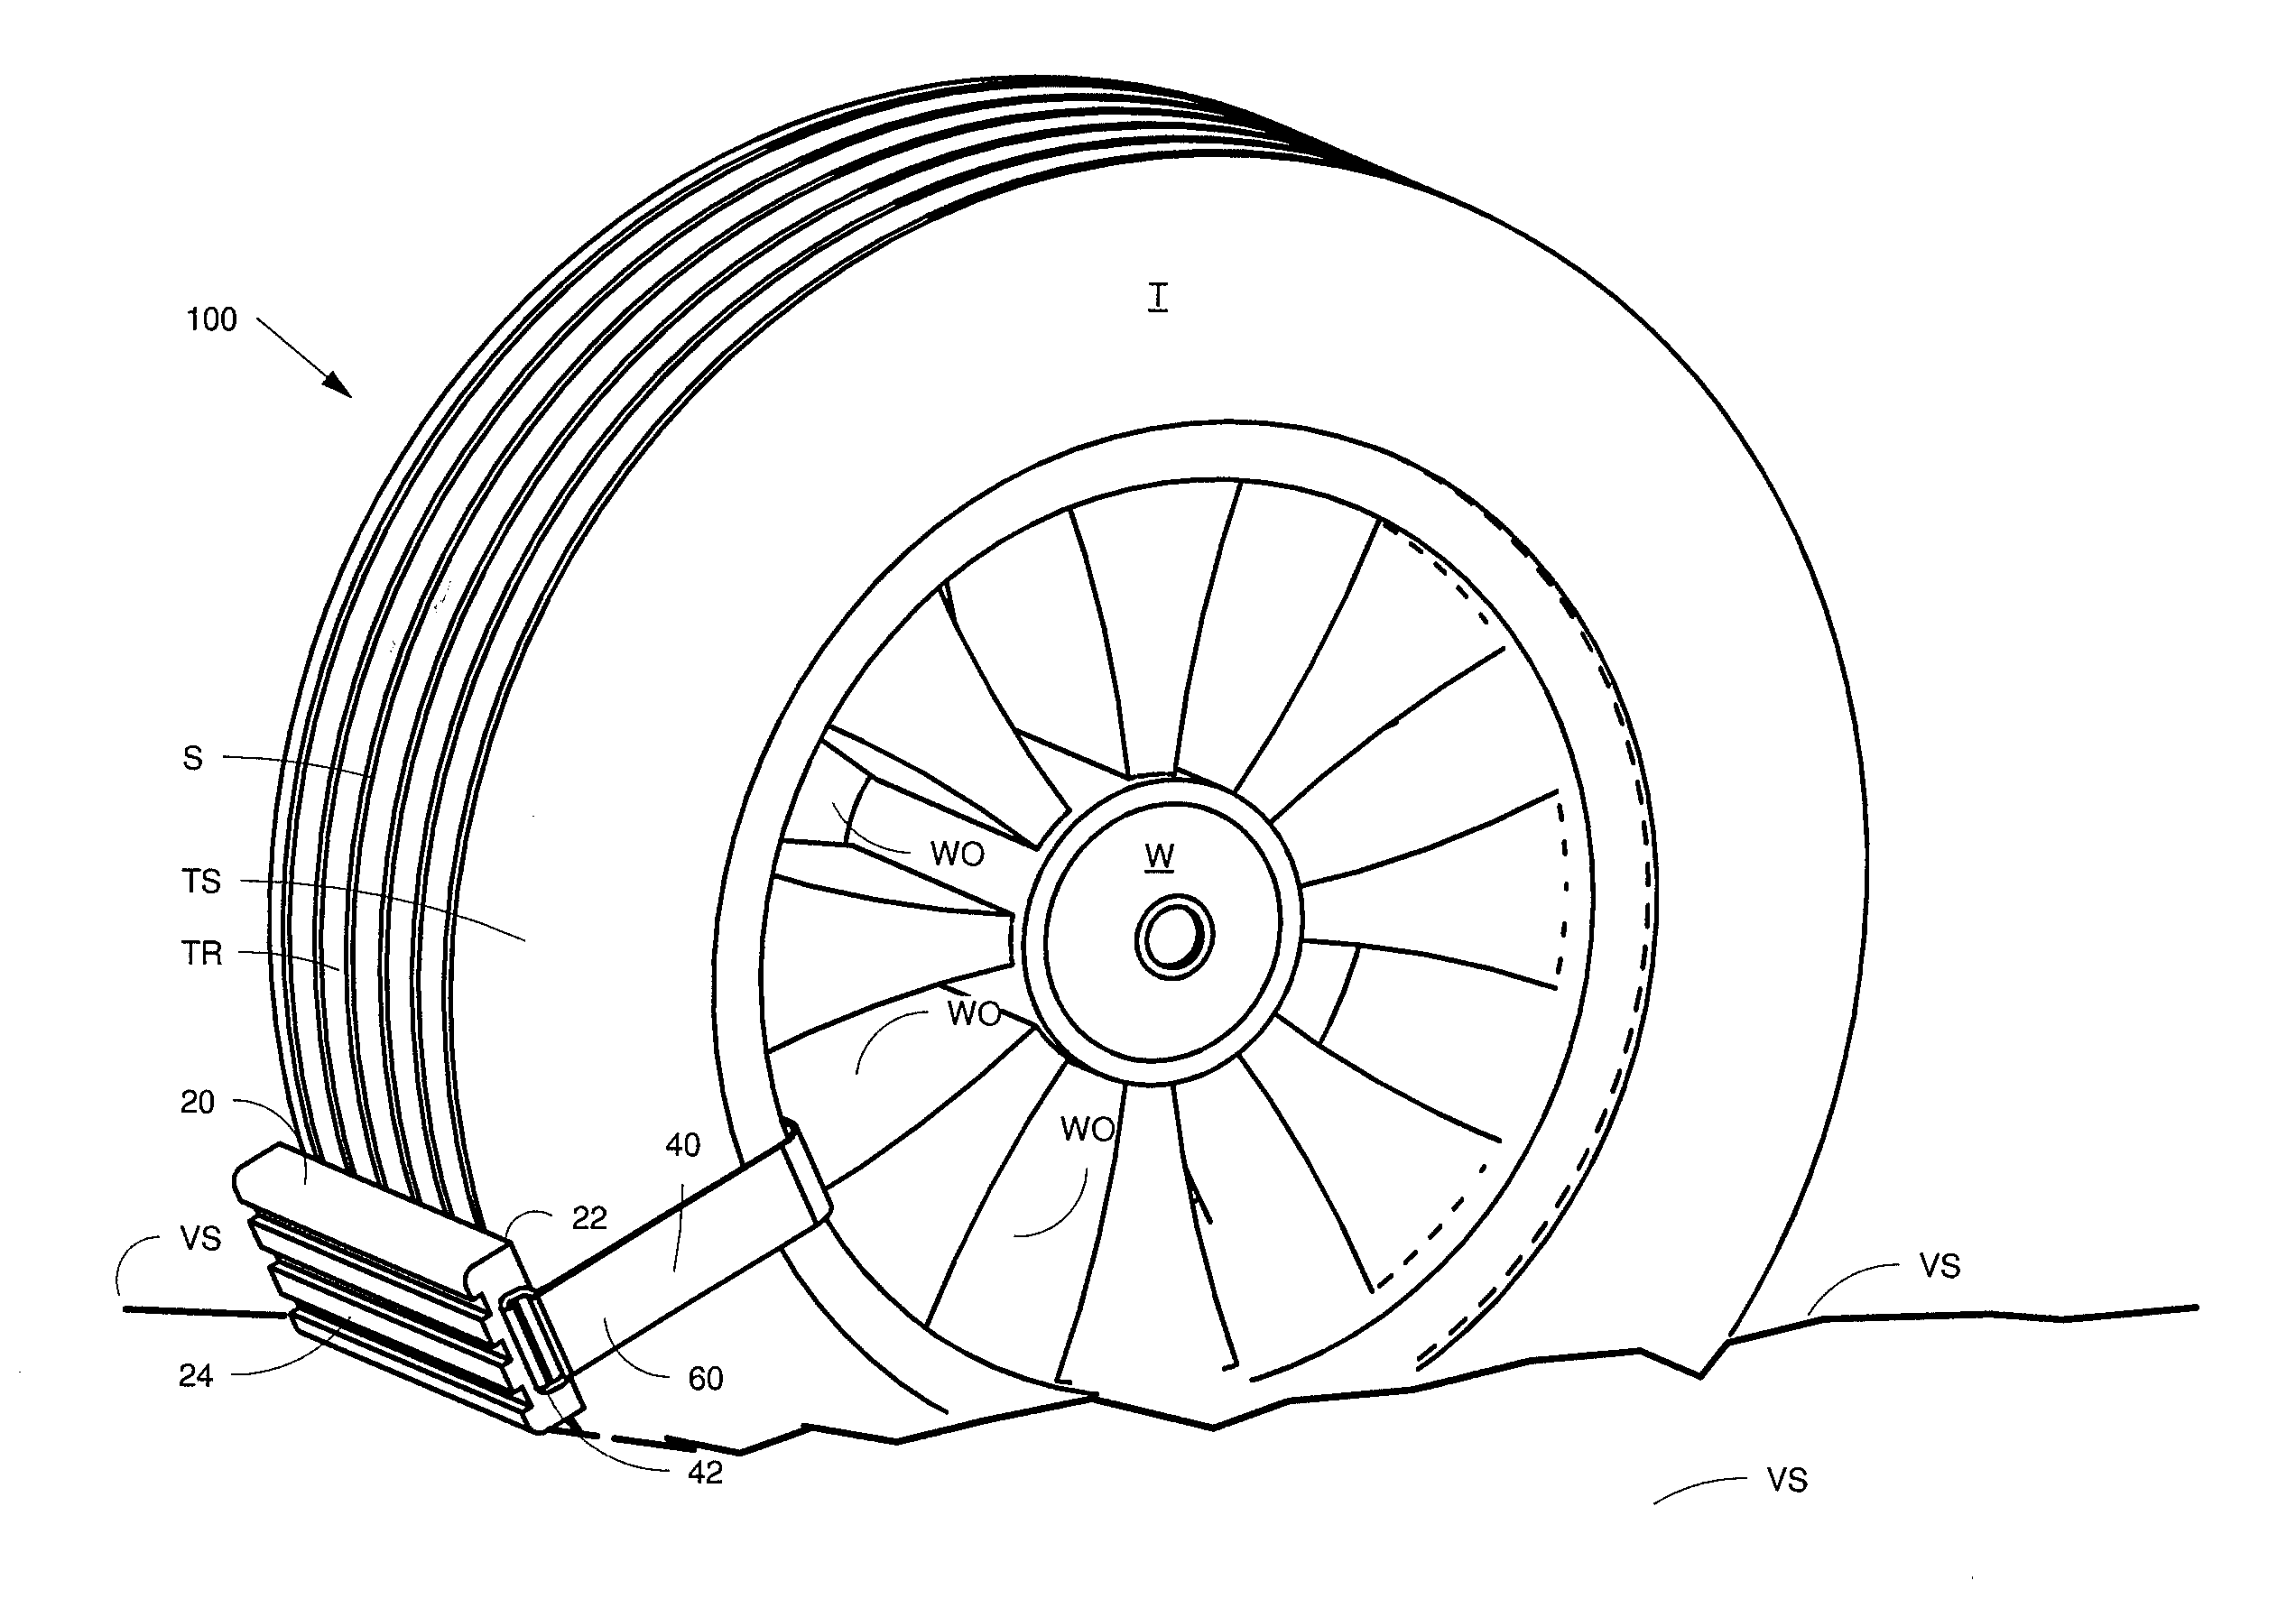 Vehicle wheel lifting block apparatus for climbing out of depression in viscous surfaces